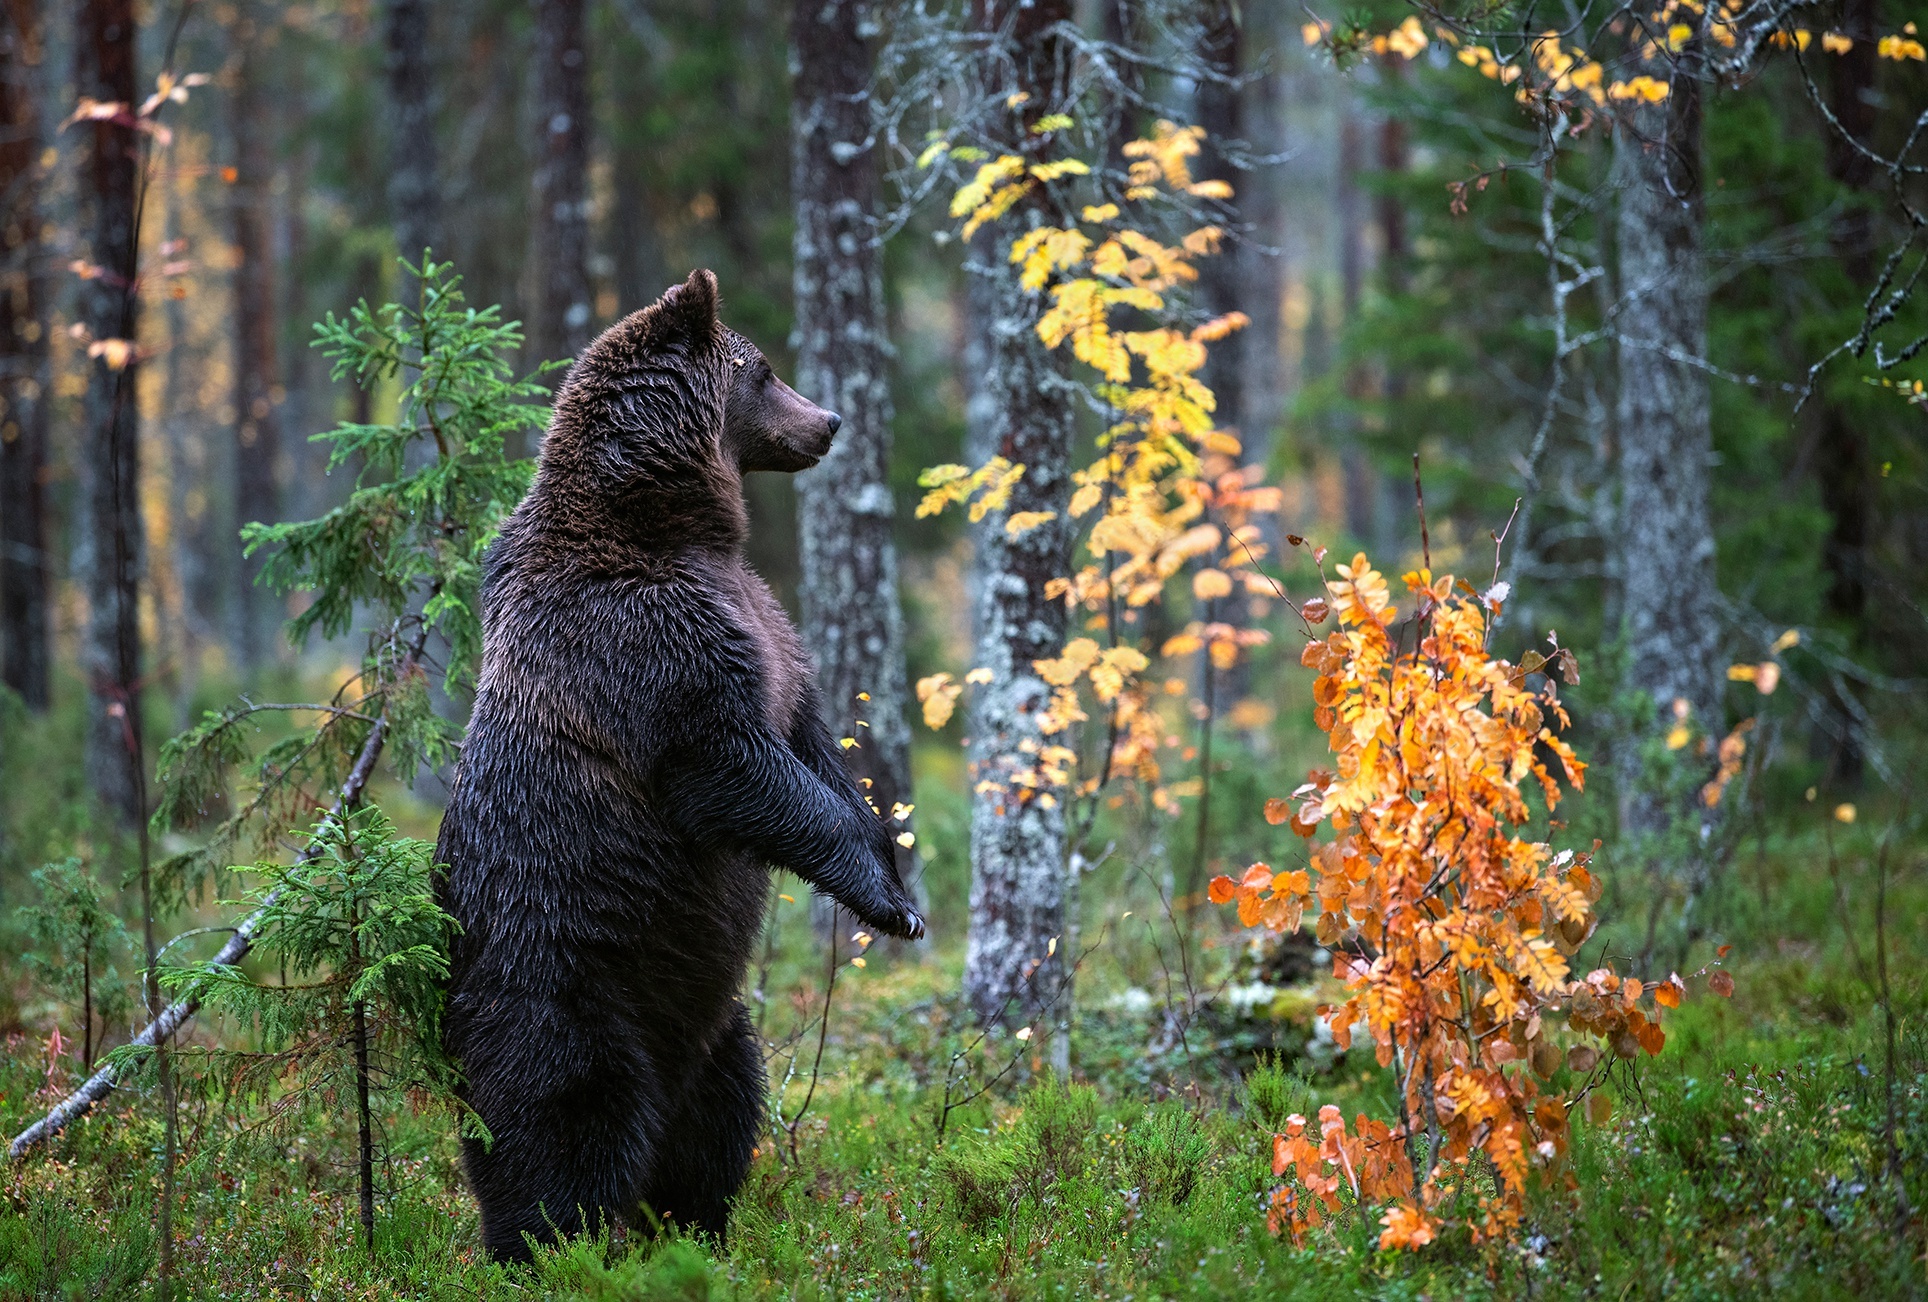 Image: Forest, leaves, grass, nature, bear, brown, carnivore, wild, stand, fall, feet